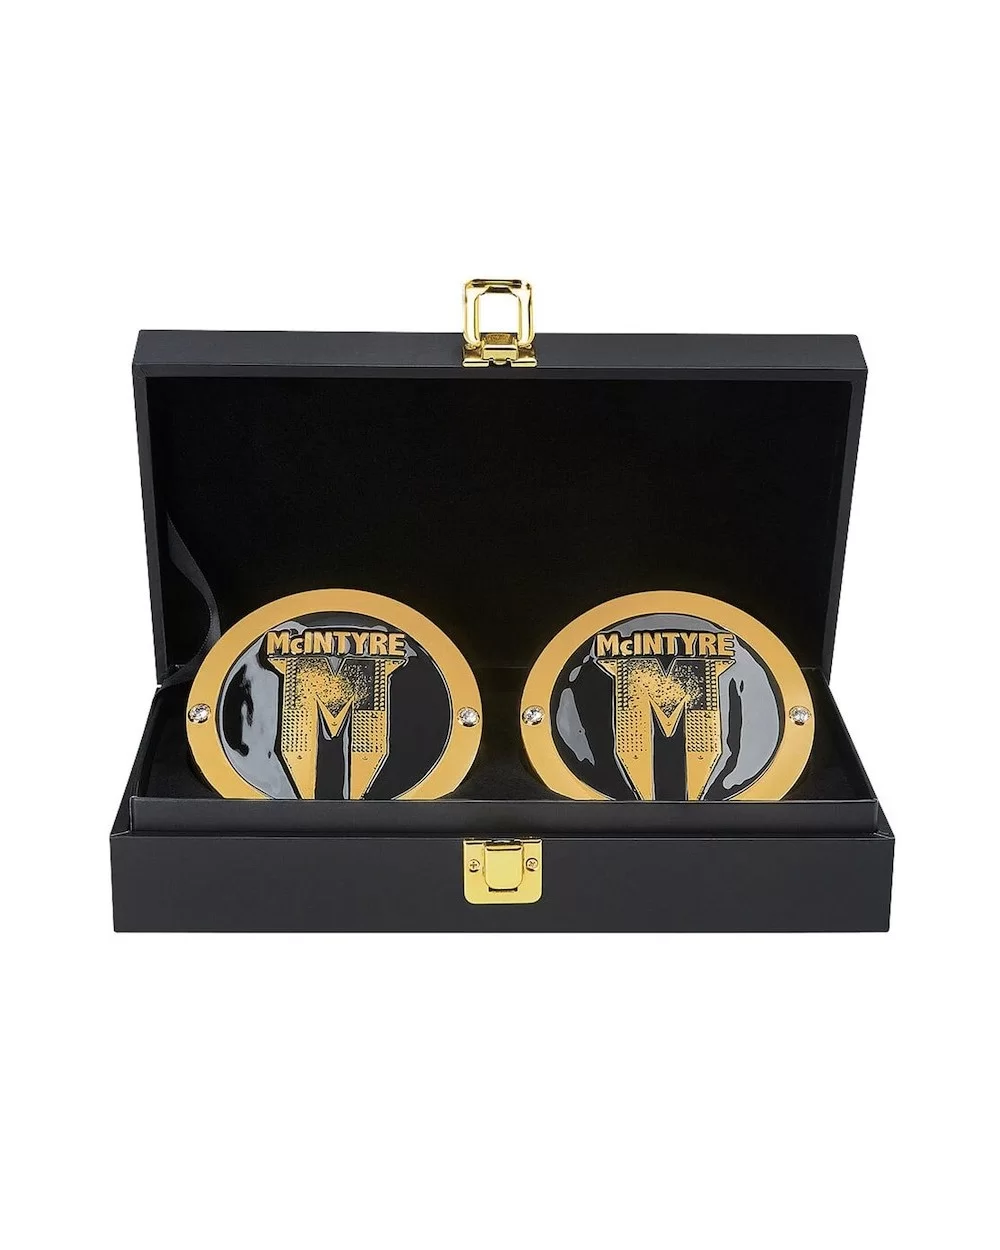 Drew McIntyre Championship Replica Side Plate Box Set $27.20 Collectibles